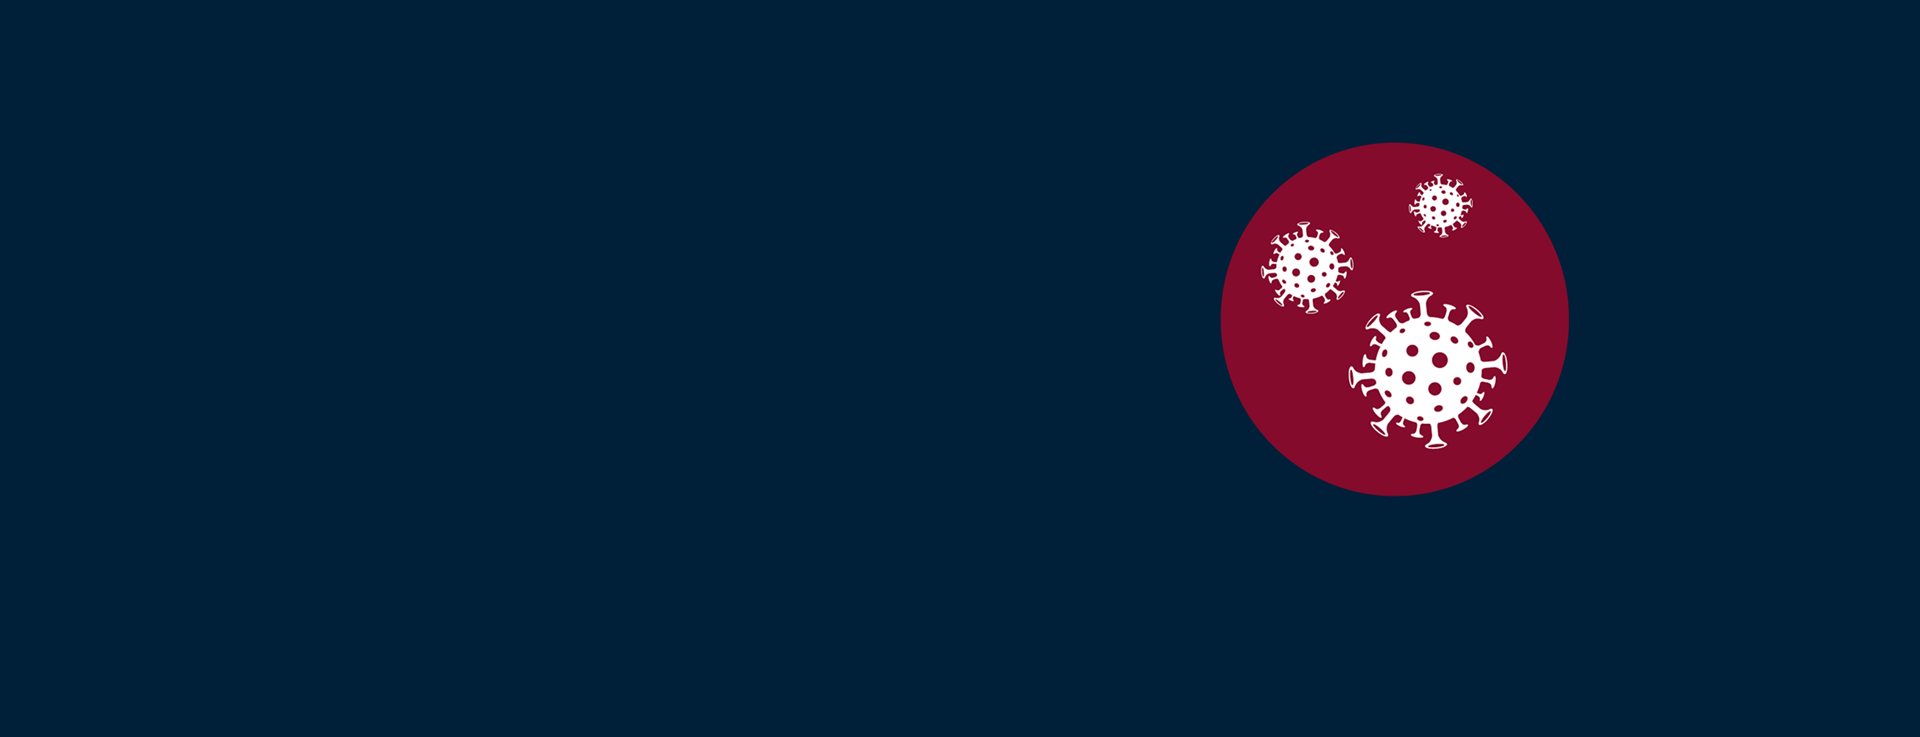 Blue banner with illustration of a red virus cell